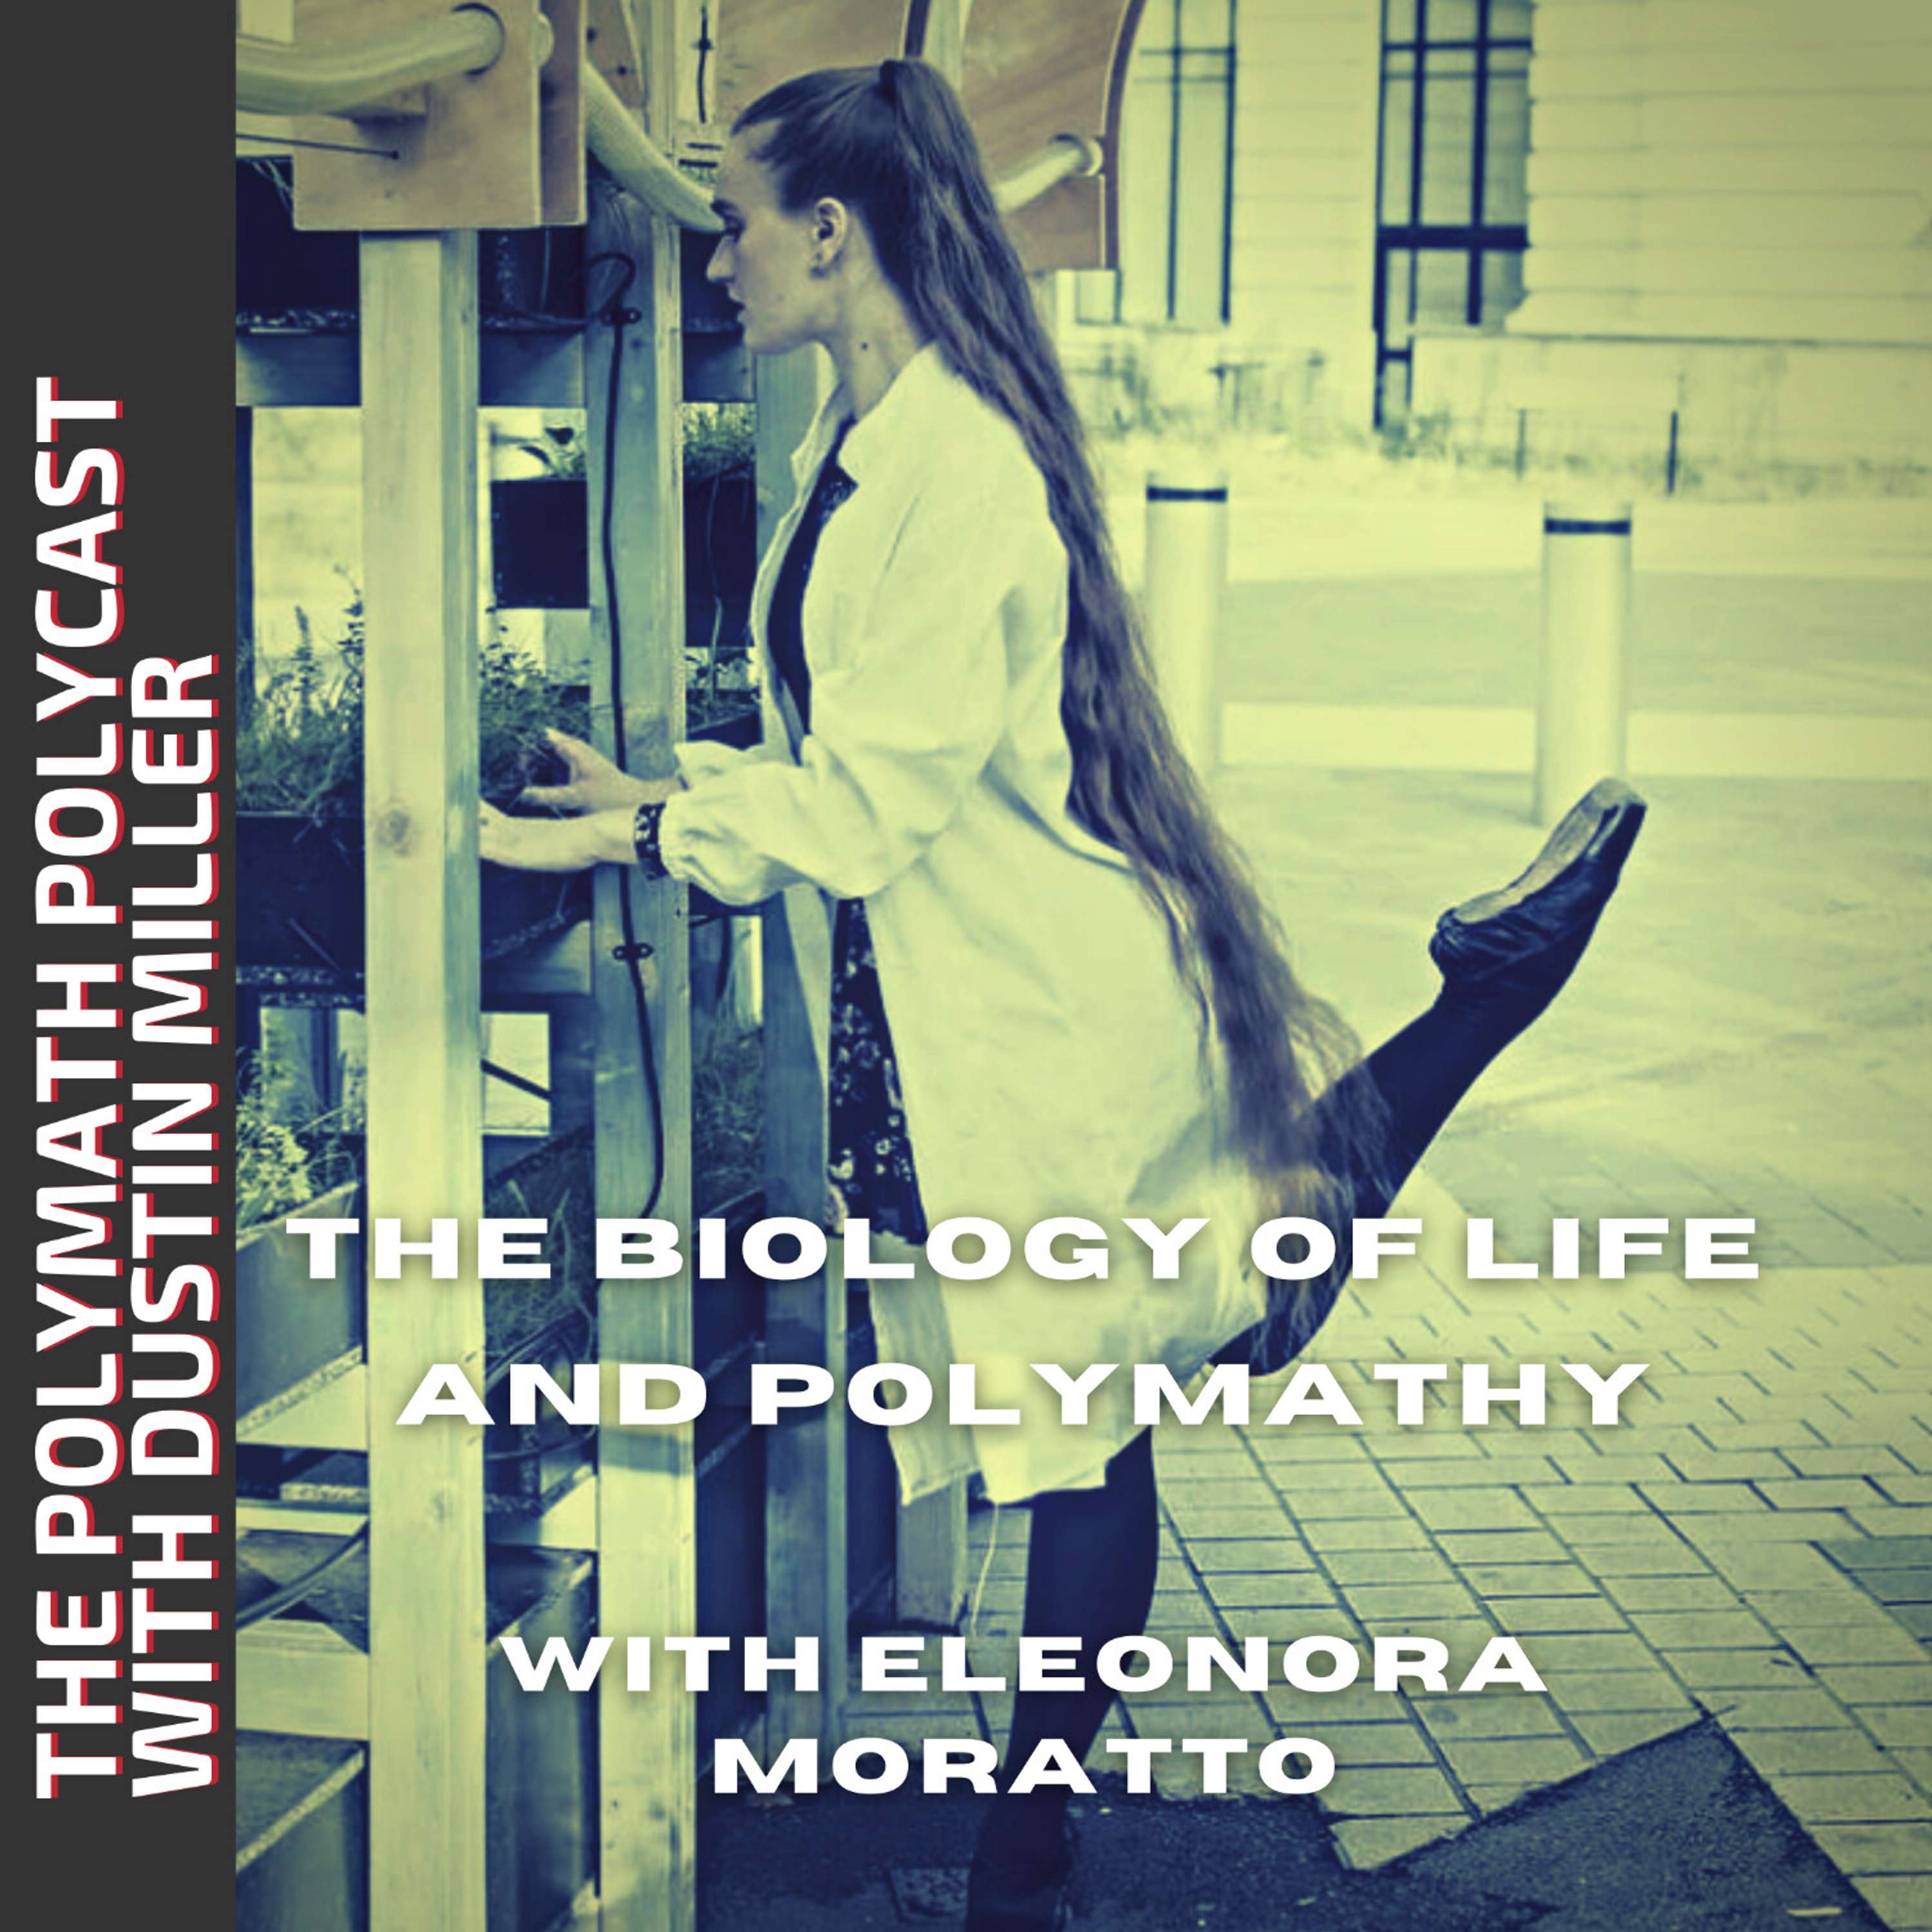 The Biology of Life and Polymathy with Eleonora Moratto [Interview]